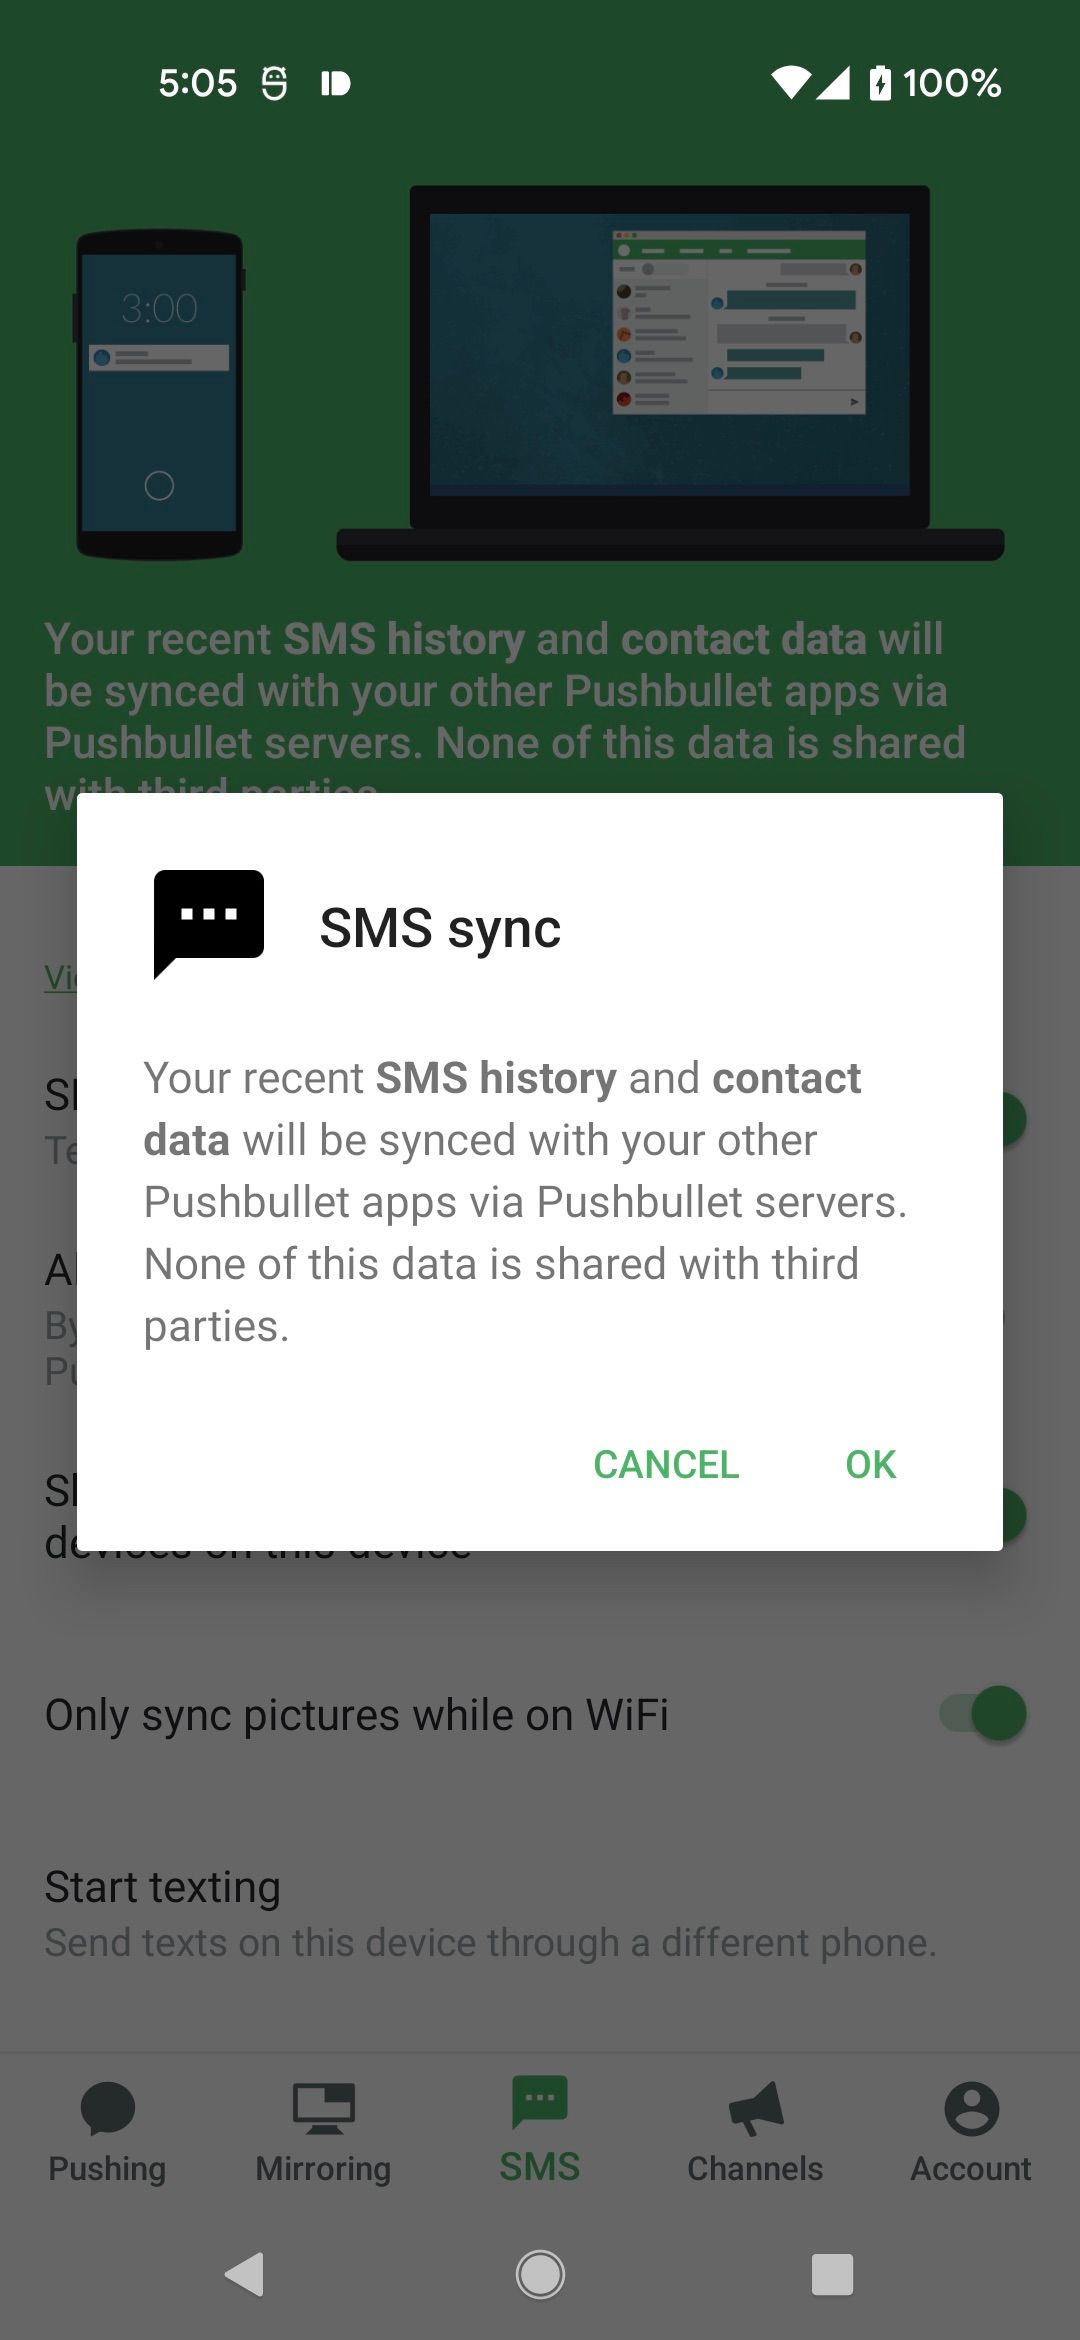 Pushbullet Updated Privacy Policy Dialog